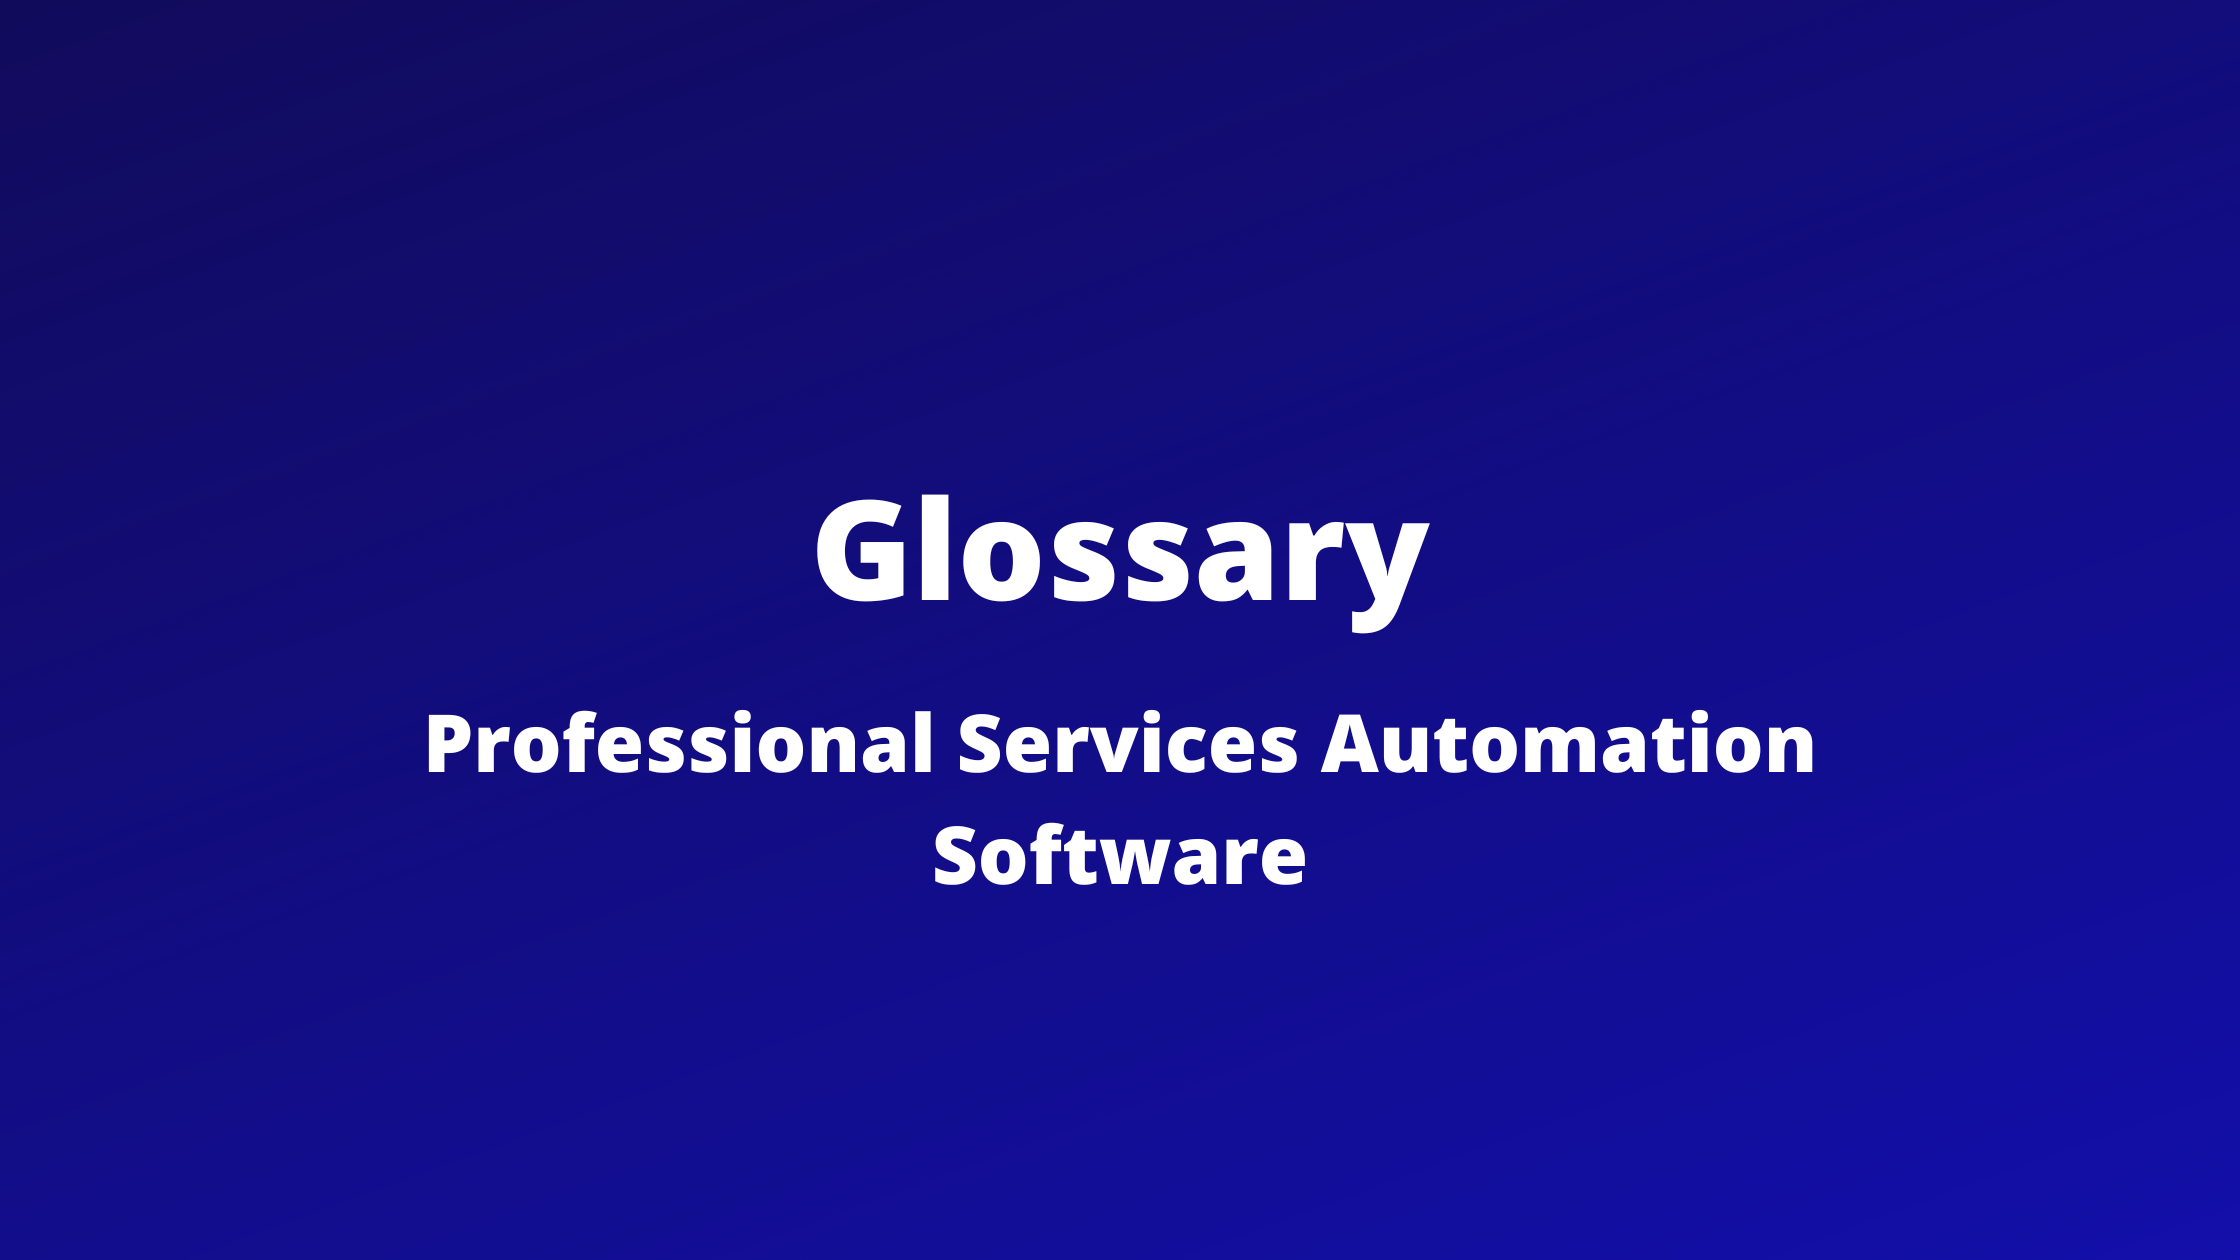 Professional Services automation software